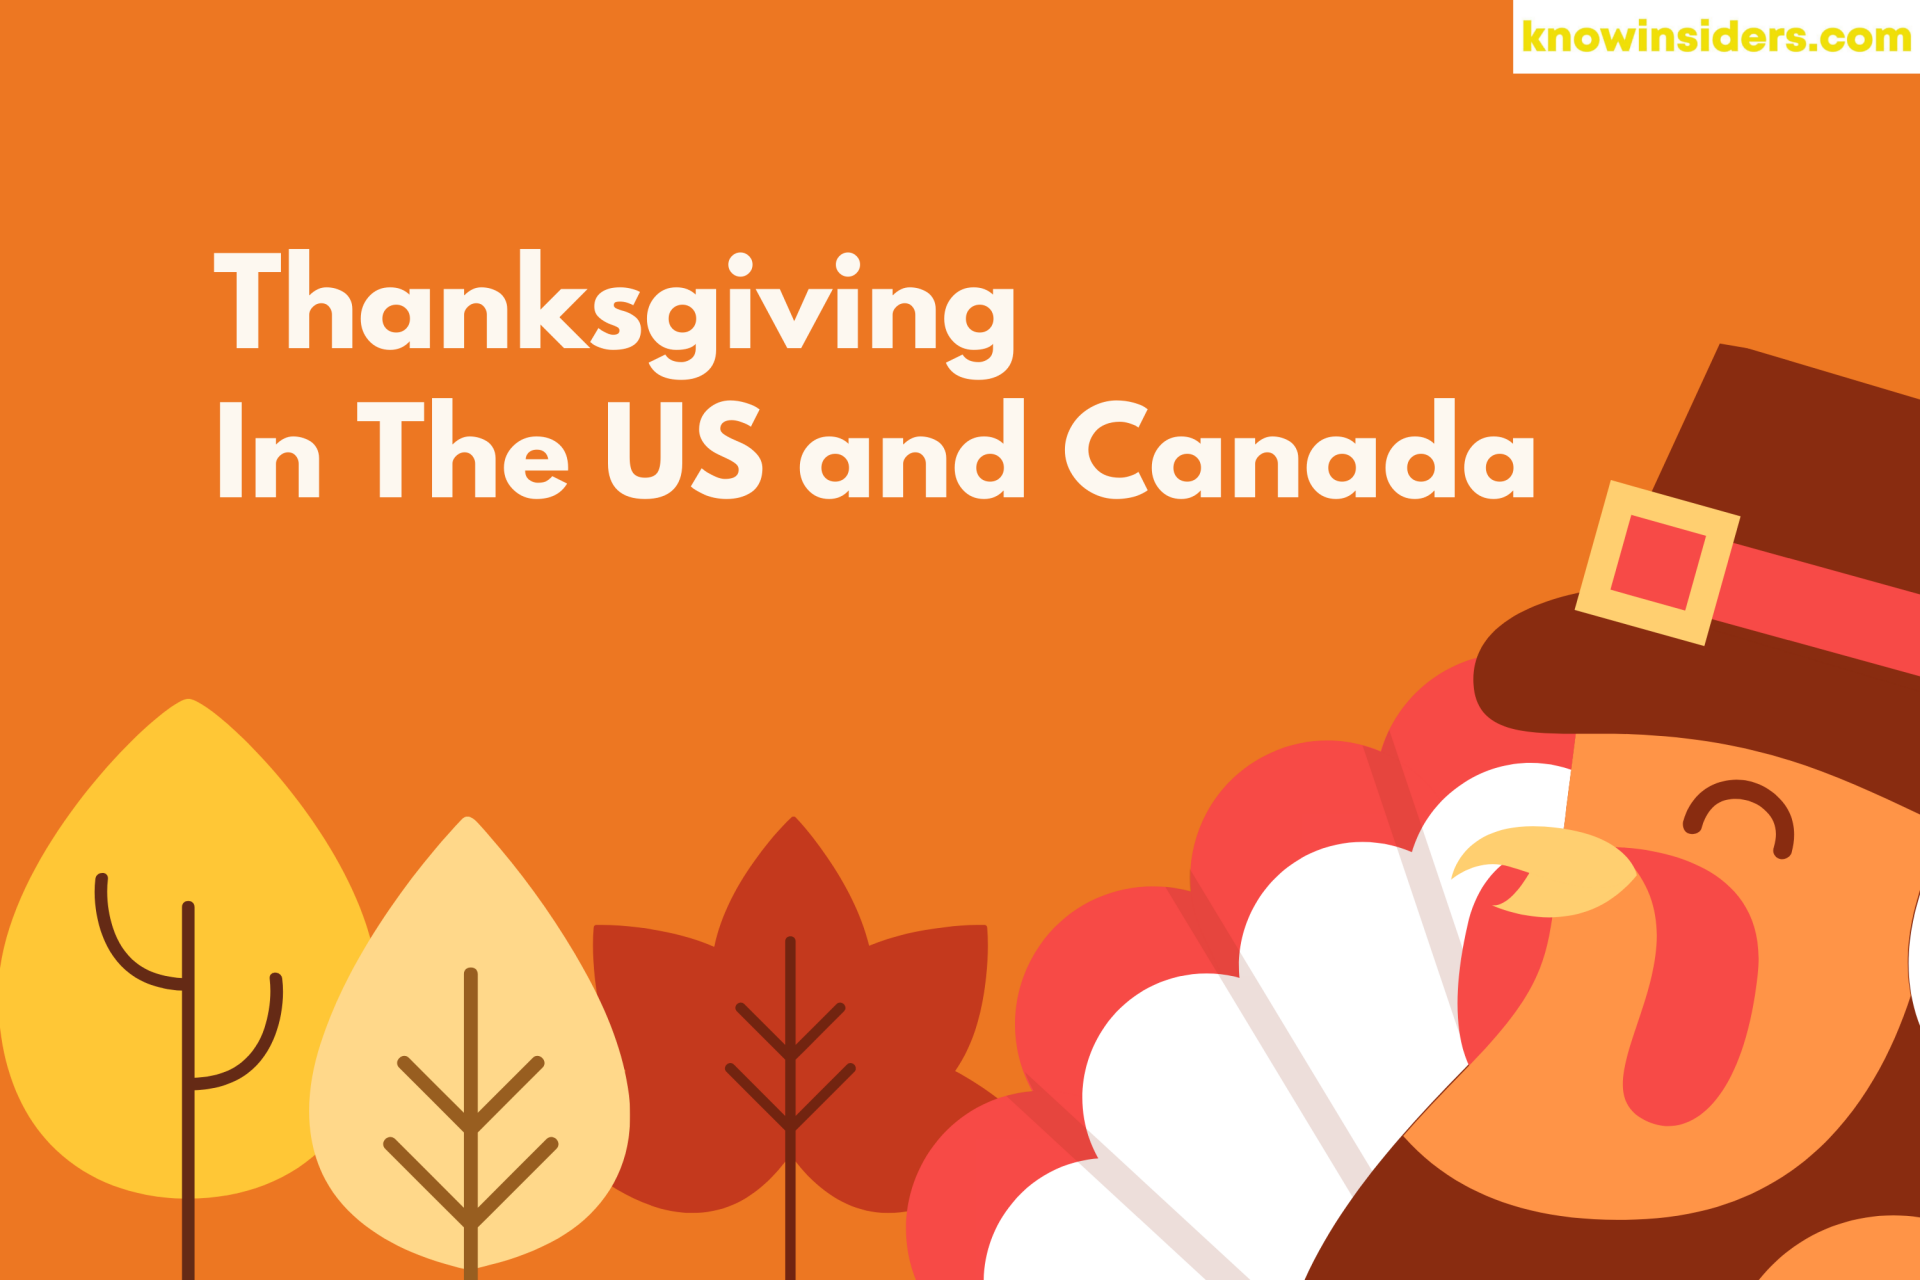 Thanksgiving In The US and Canada